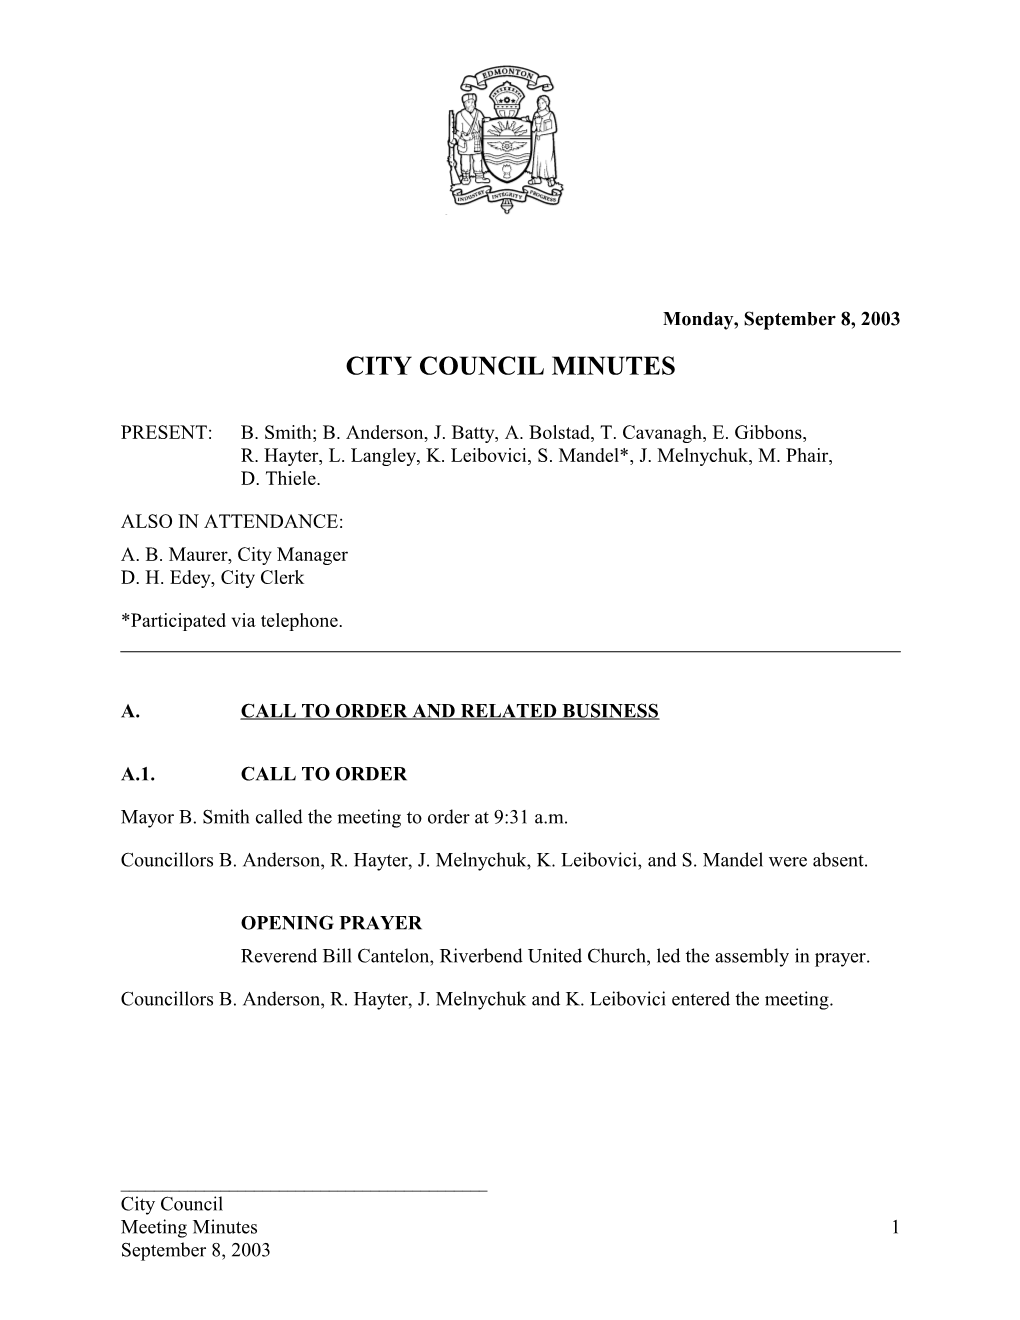 Minutes for City Council September 8, 2003 Meeting